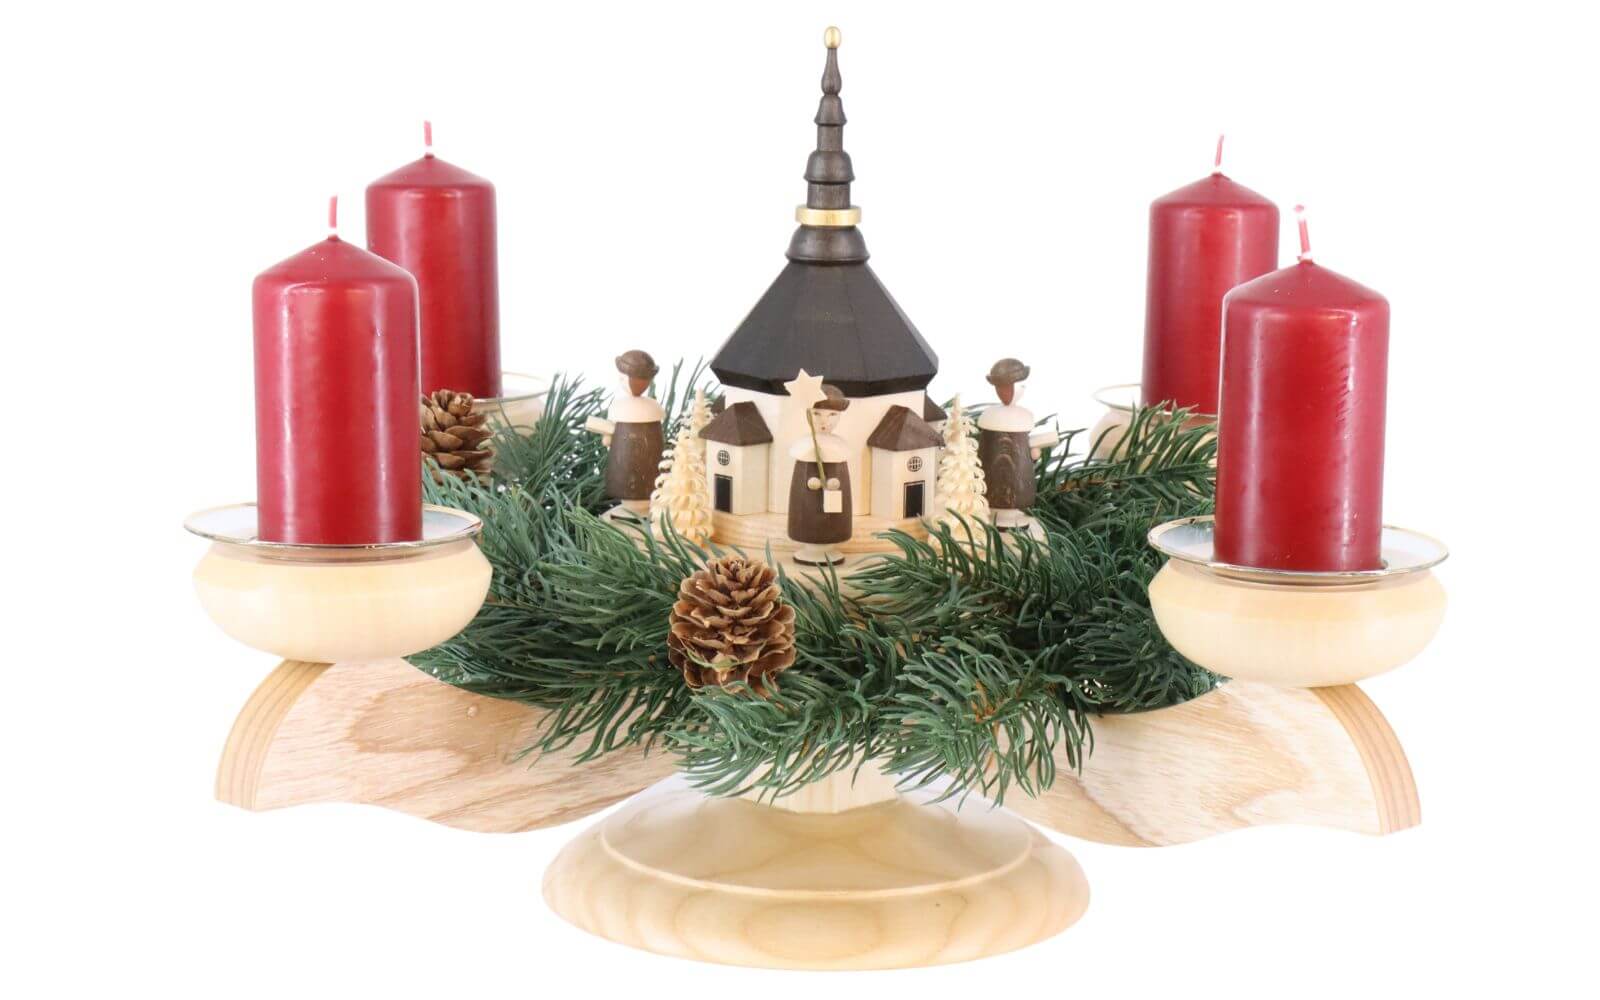 Advent candlestick with Seiffen church buy online